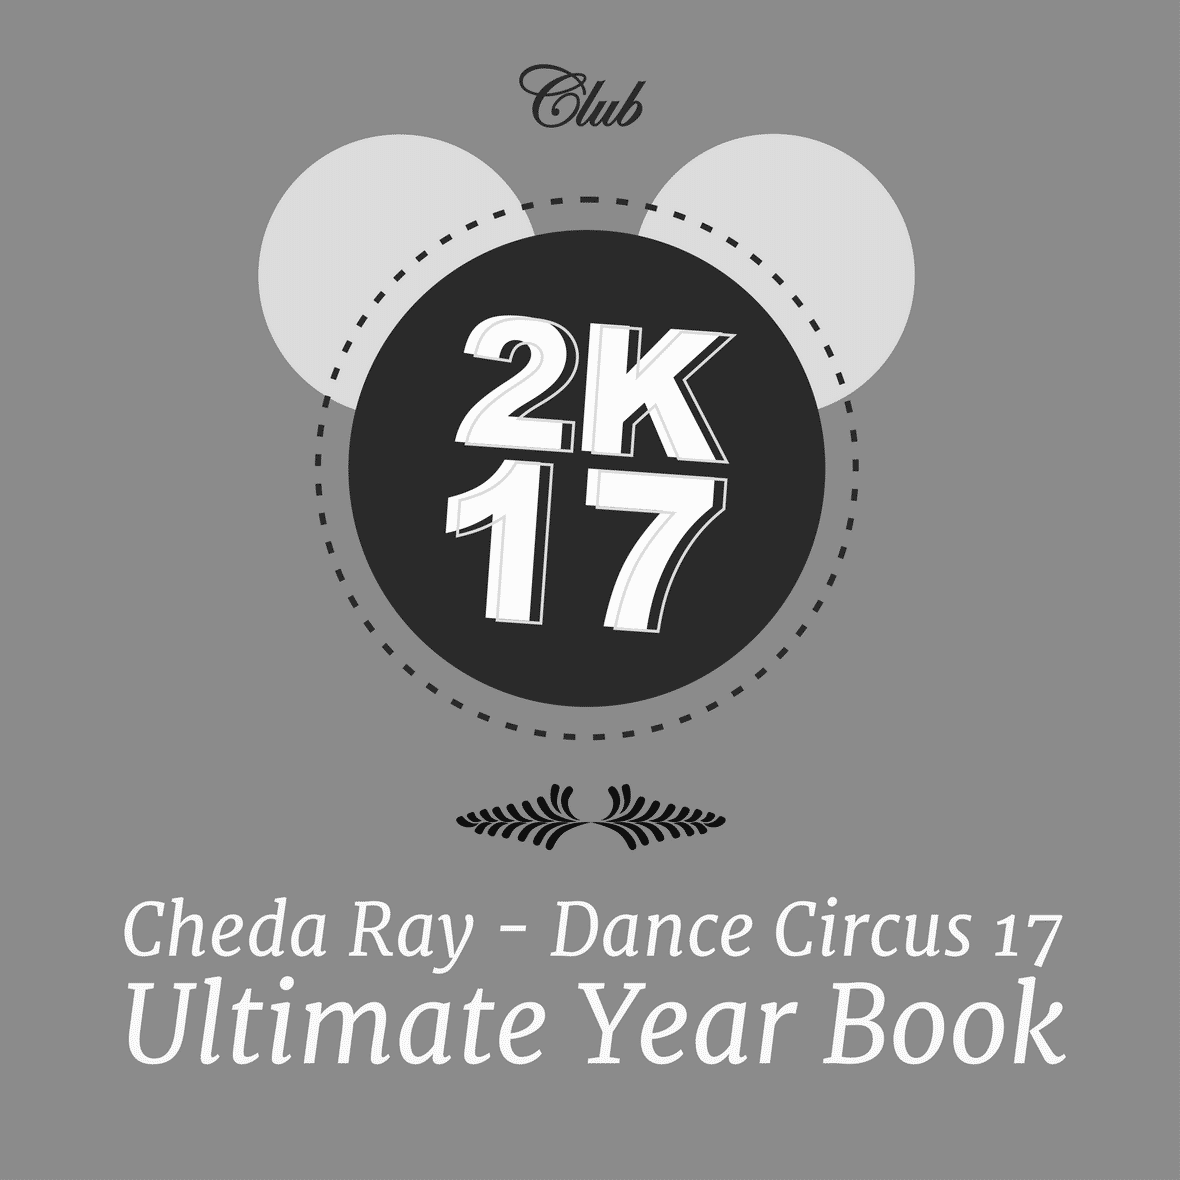 Dance Circus 17 - The Ultimate Year Book